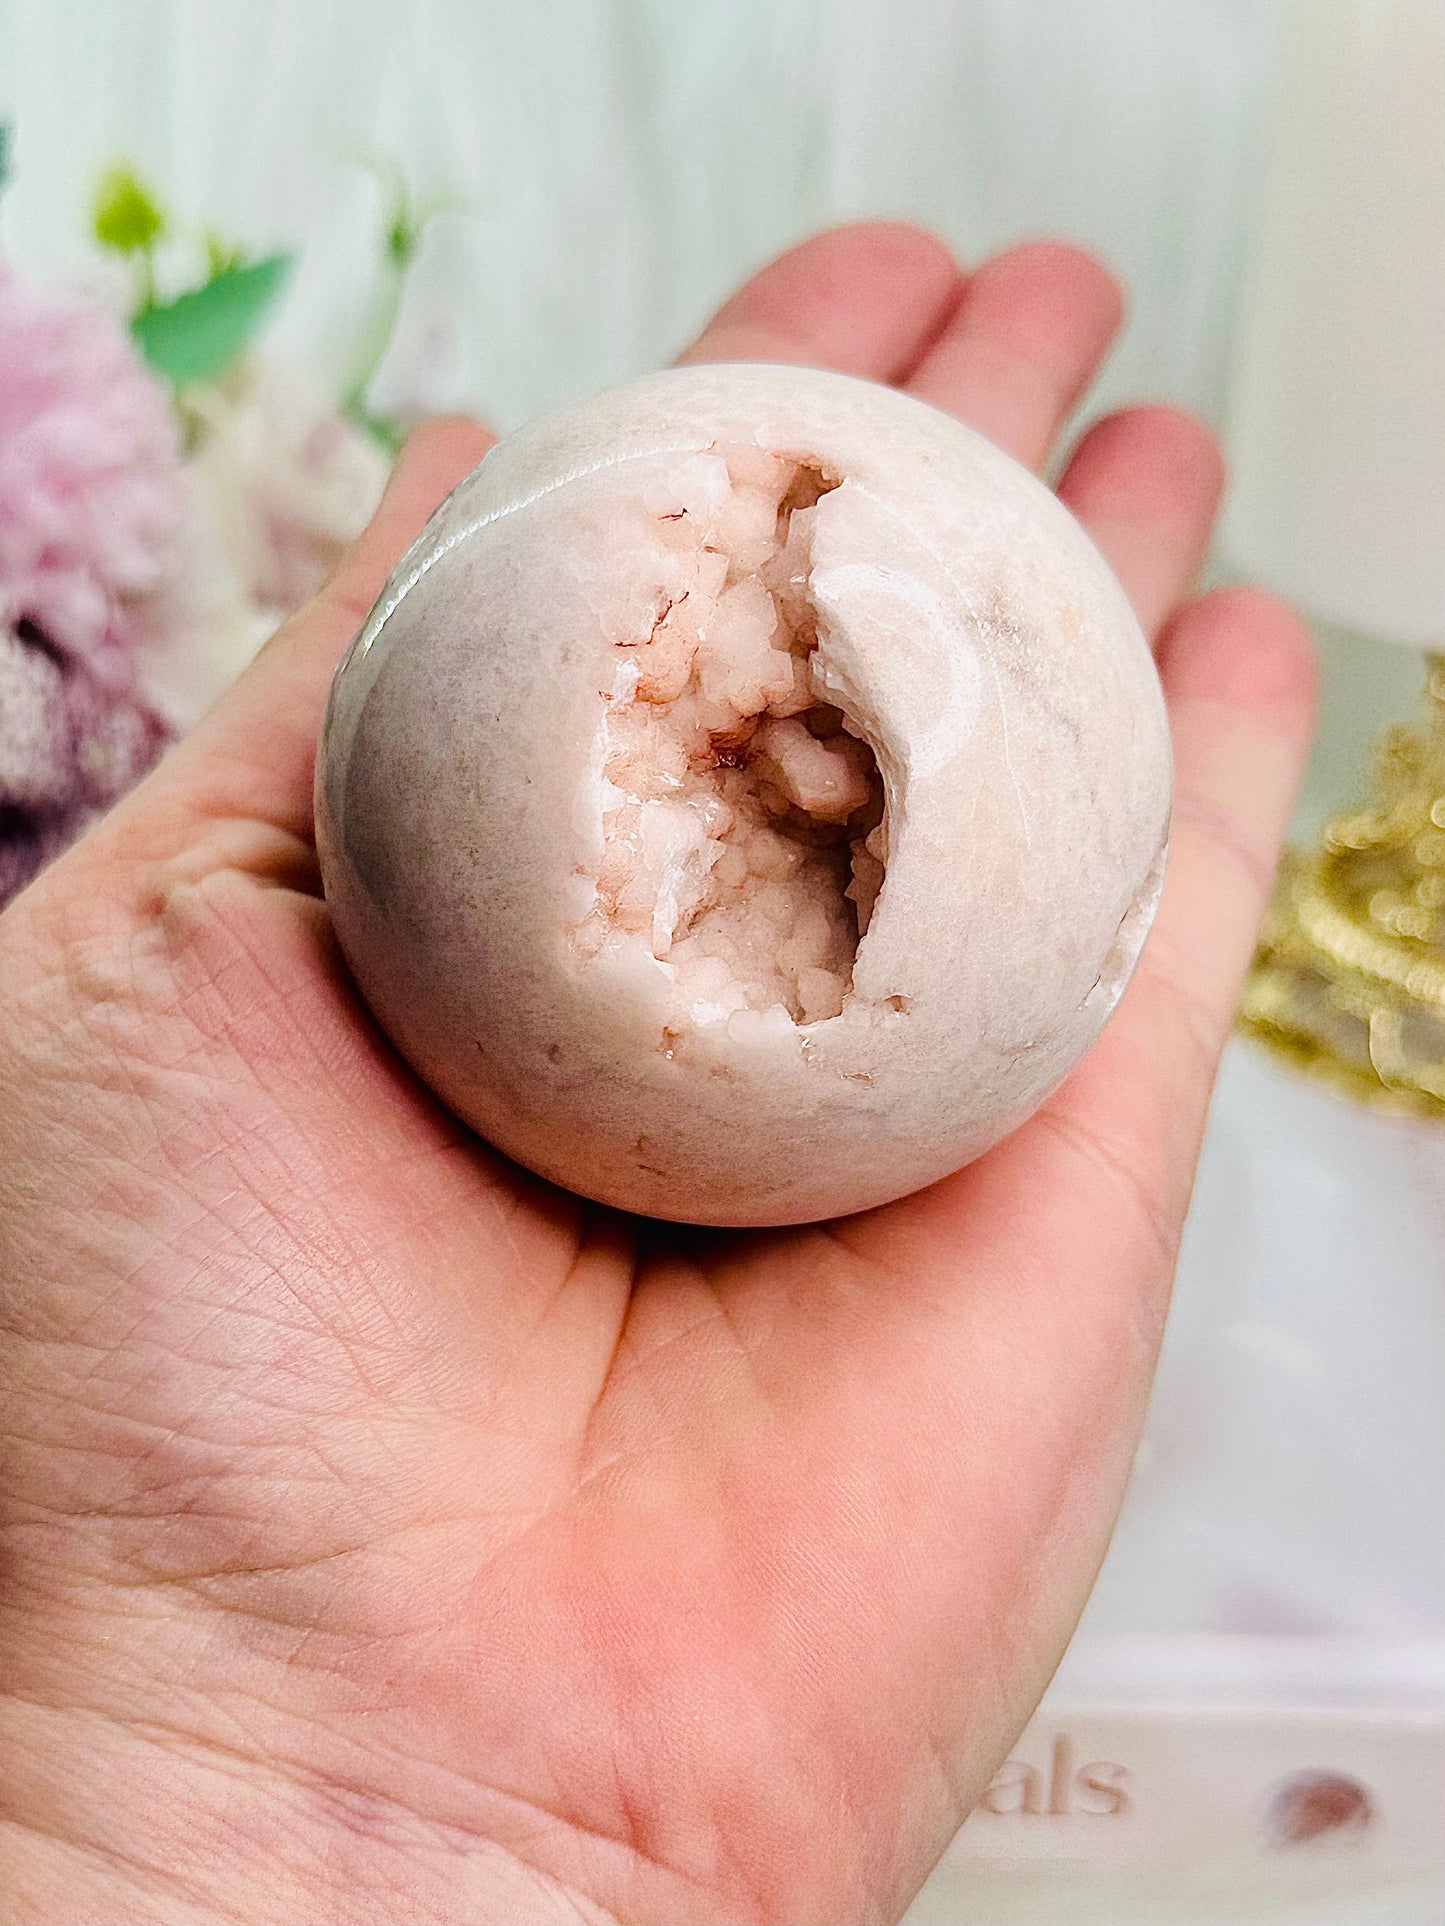 Spectacular & Unique Stunning Druzy Pink Amethyst Sphere From Brazil (5cm) A Gorgeous Magical Piece On Silver Stand (stand in pic is display only)